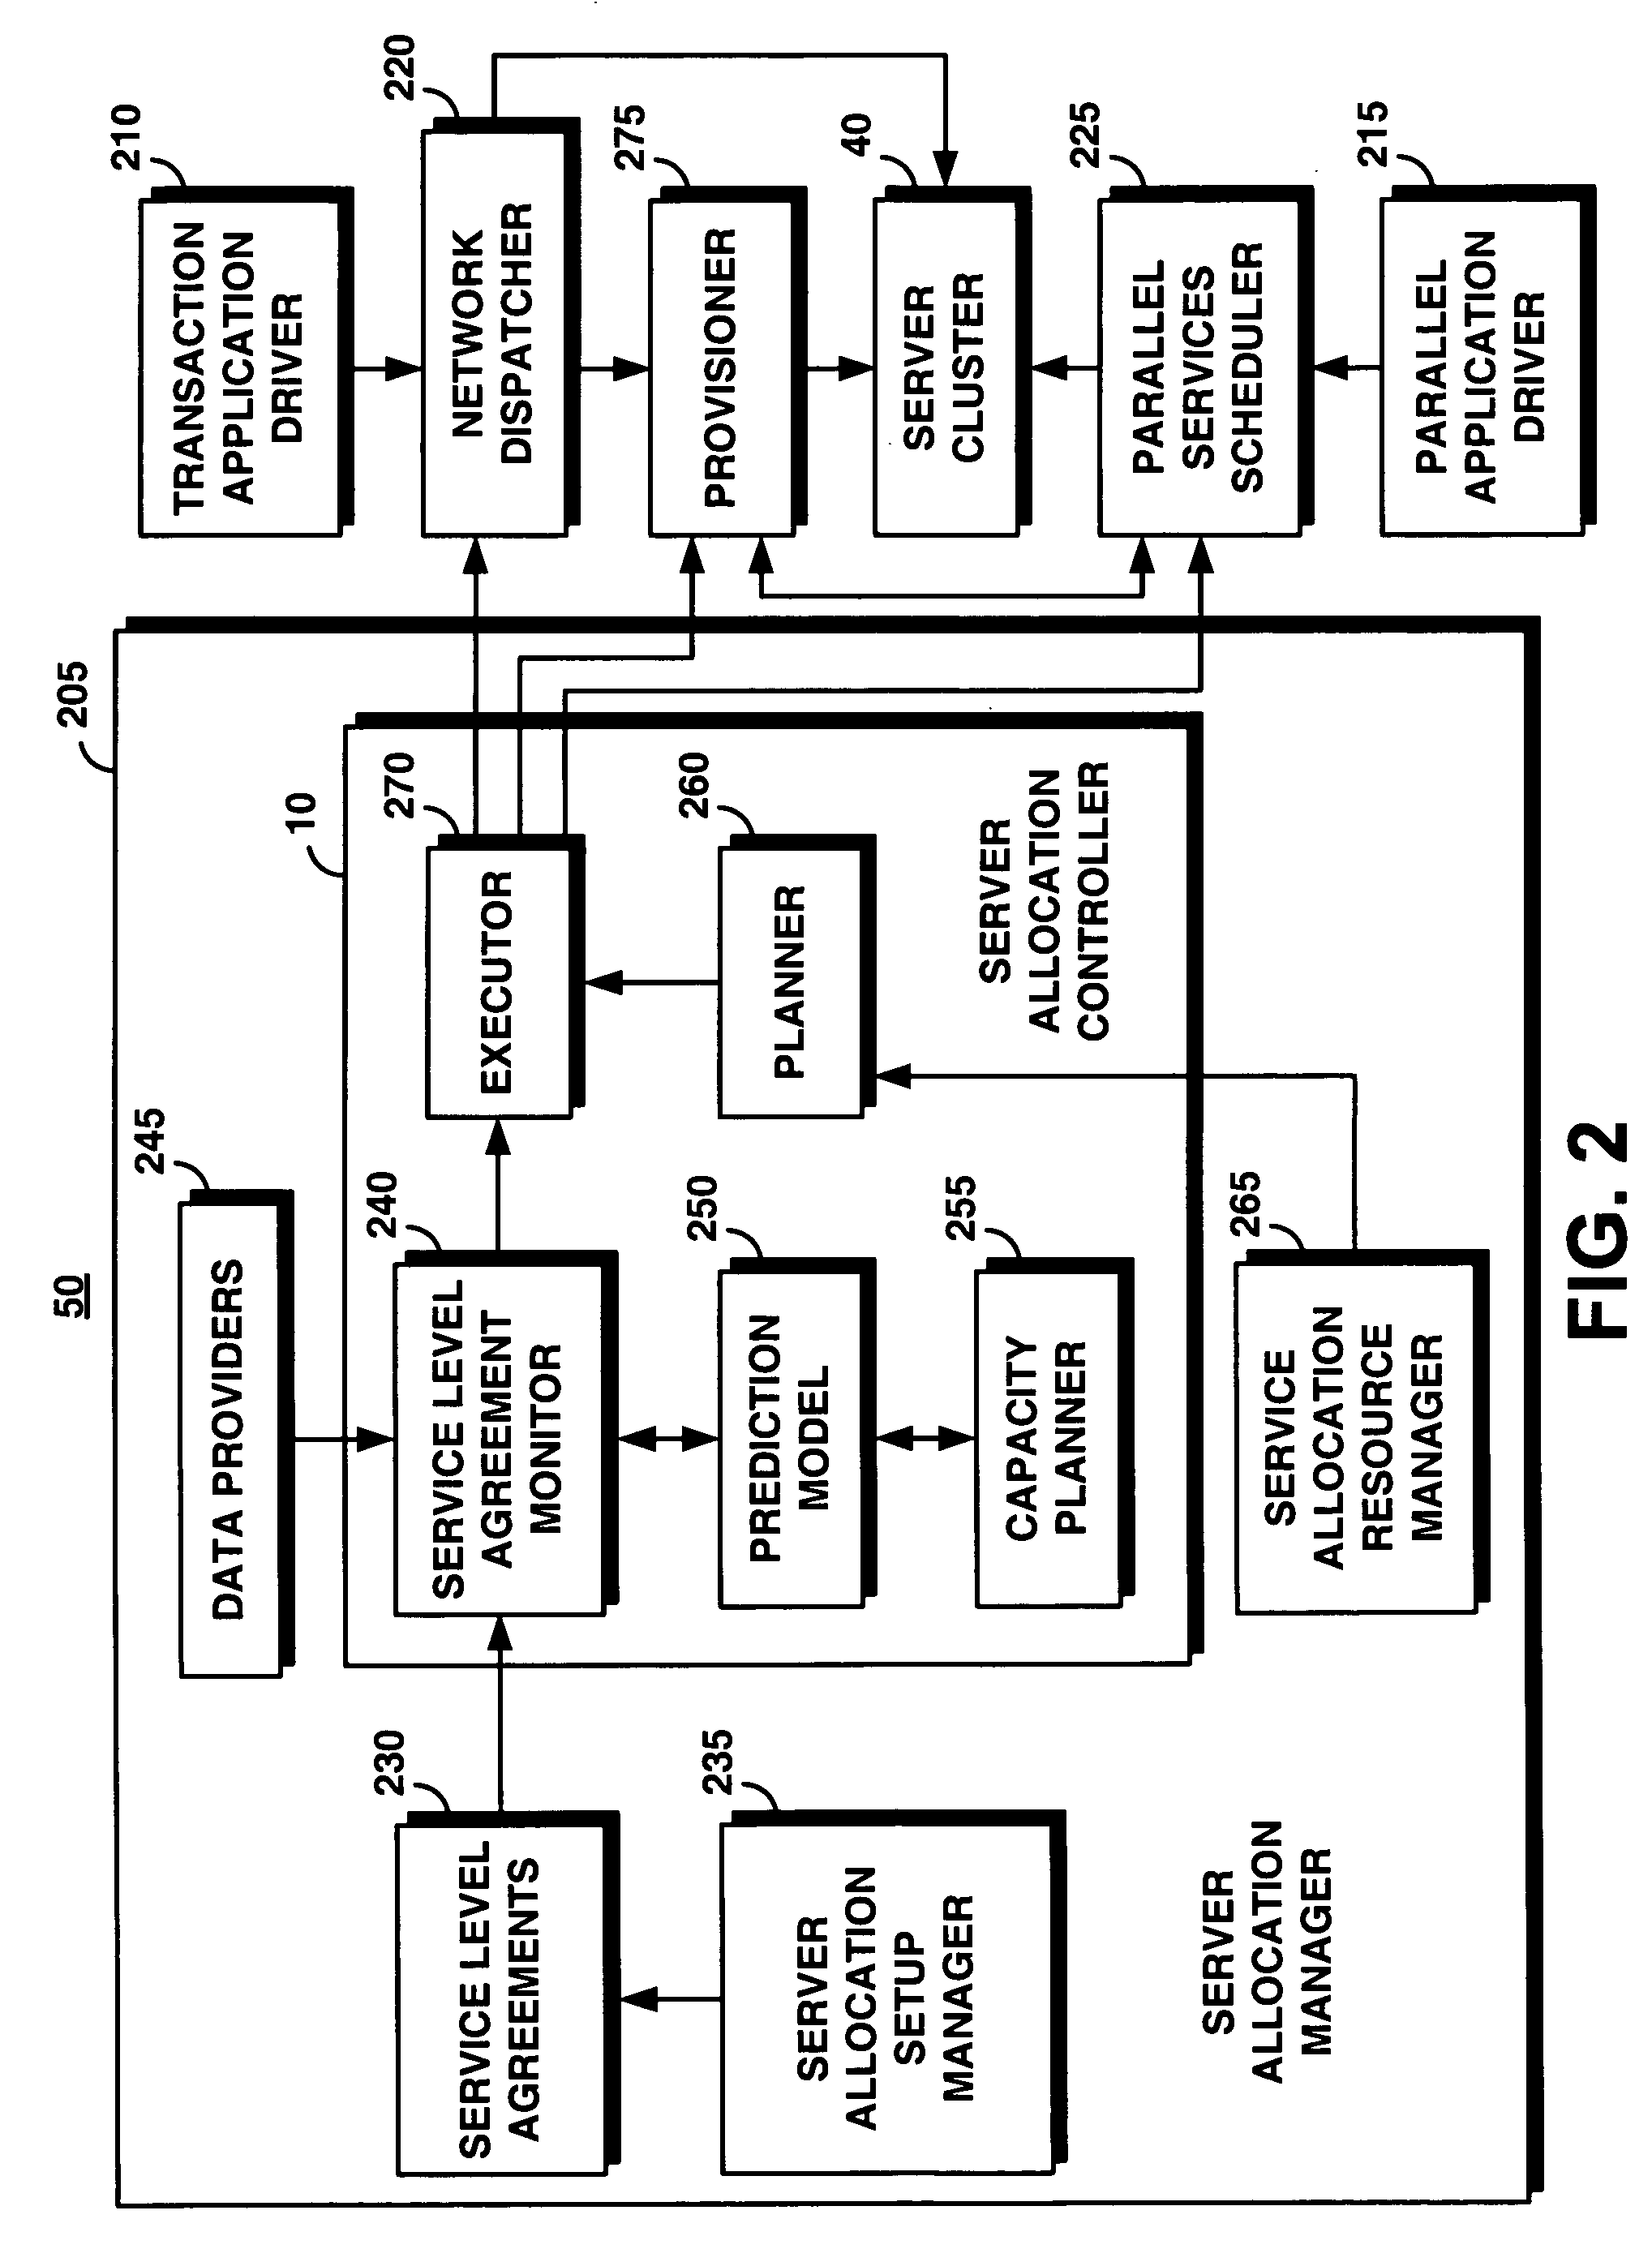 Method for supporting transaction and parallel application workloads across multiple domains based on service level agreements